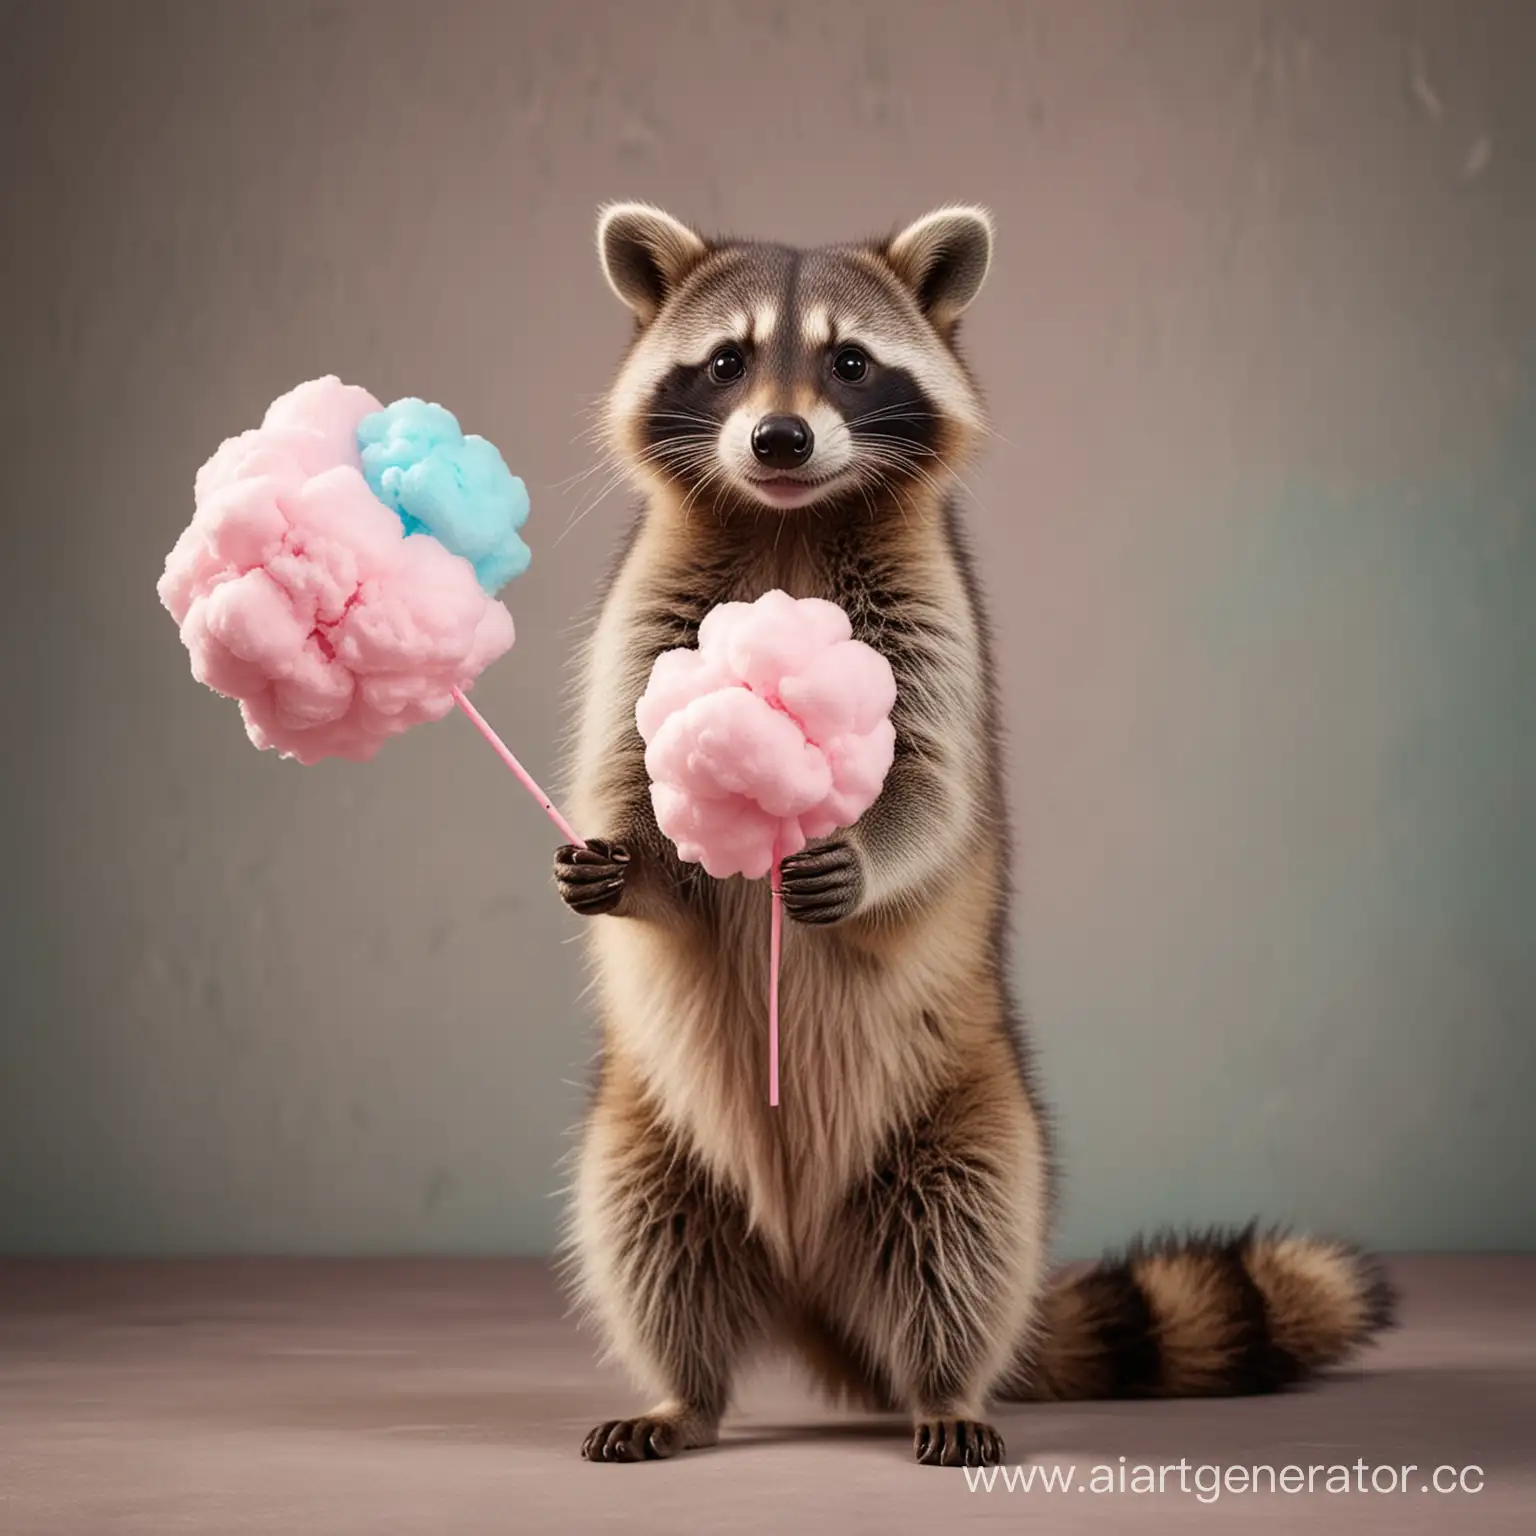 Curious-Raccoon-Holding-Cotton-Candy-FullLength-Portrait